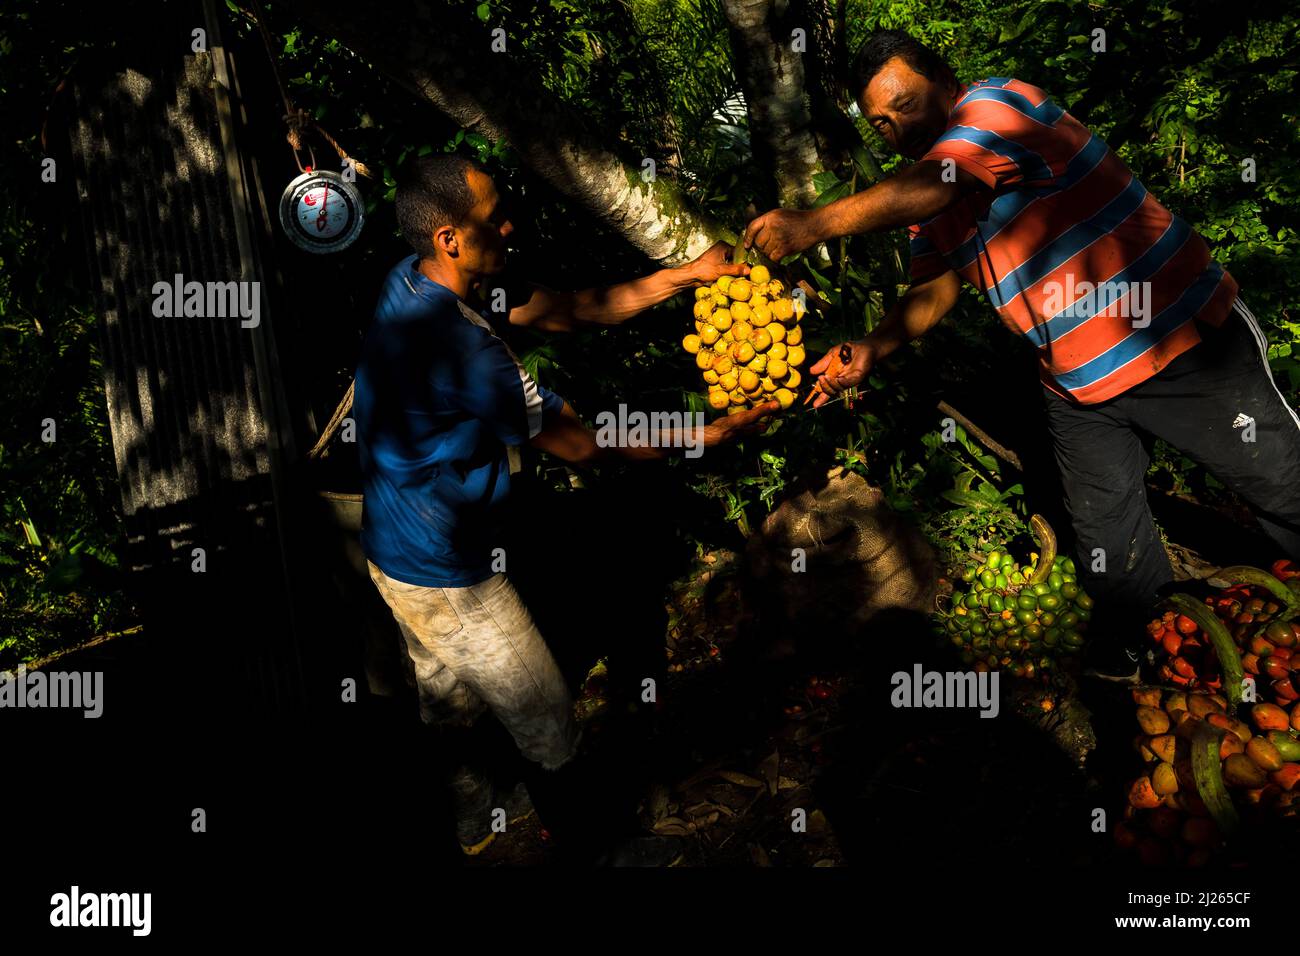 Colombian farmers weigh bunches of harvested chontaduro (peach palm) fruits on a farm near El Tambo, Cauca, Colombia. Stock Photo